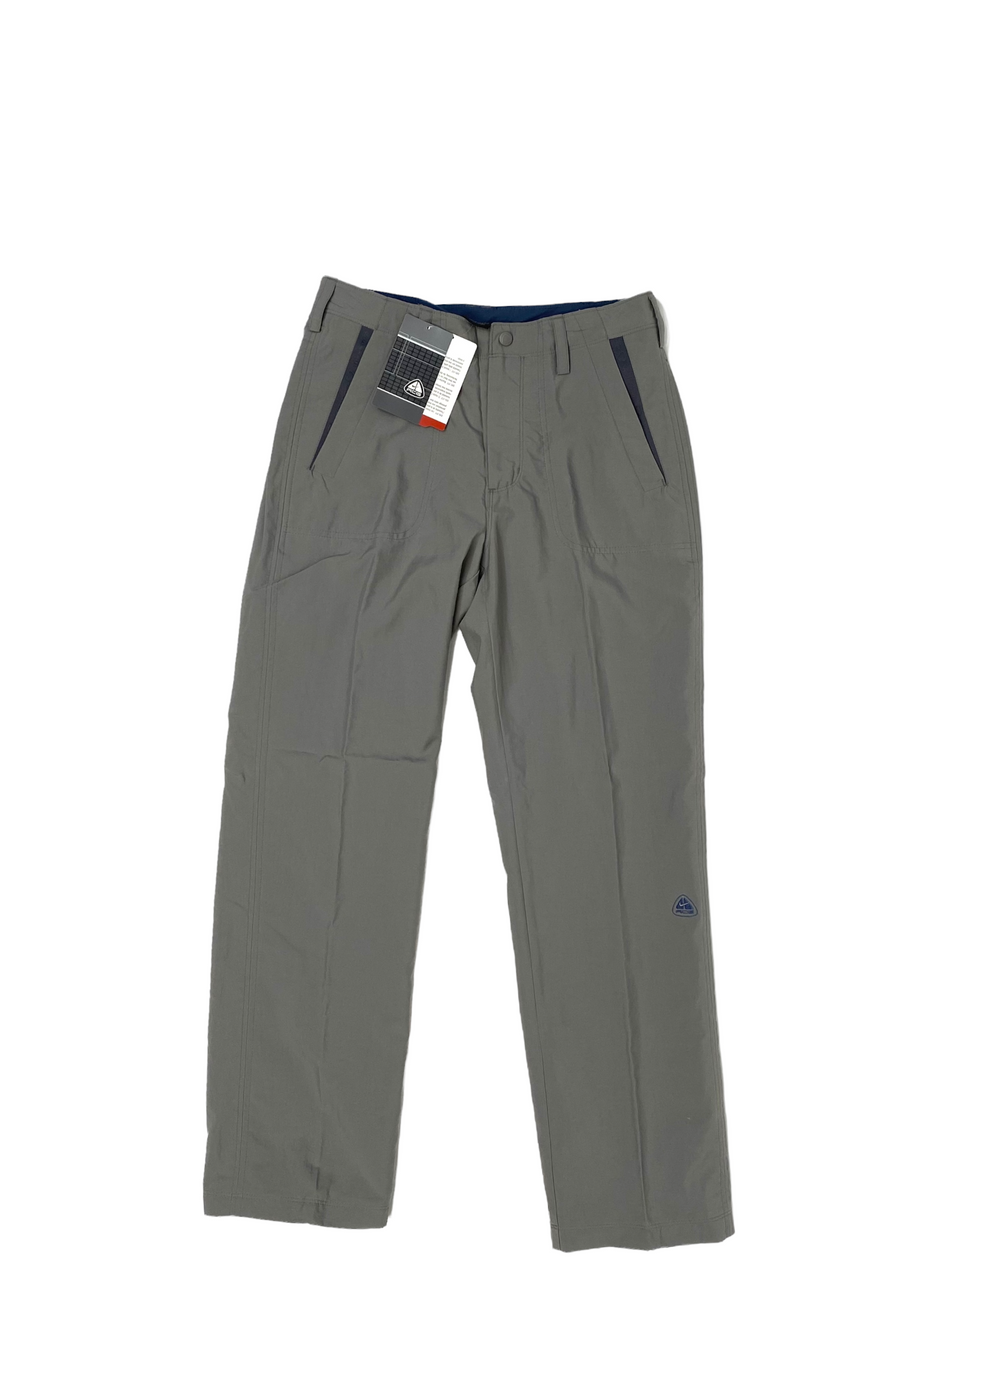 VINTAGE NIKE ACG WOMANS PARATROOPER TROUSER IN GREY - Not In Your Wardrobe™ - [Vendor]